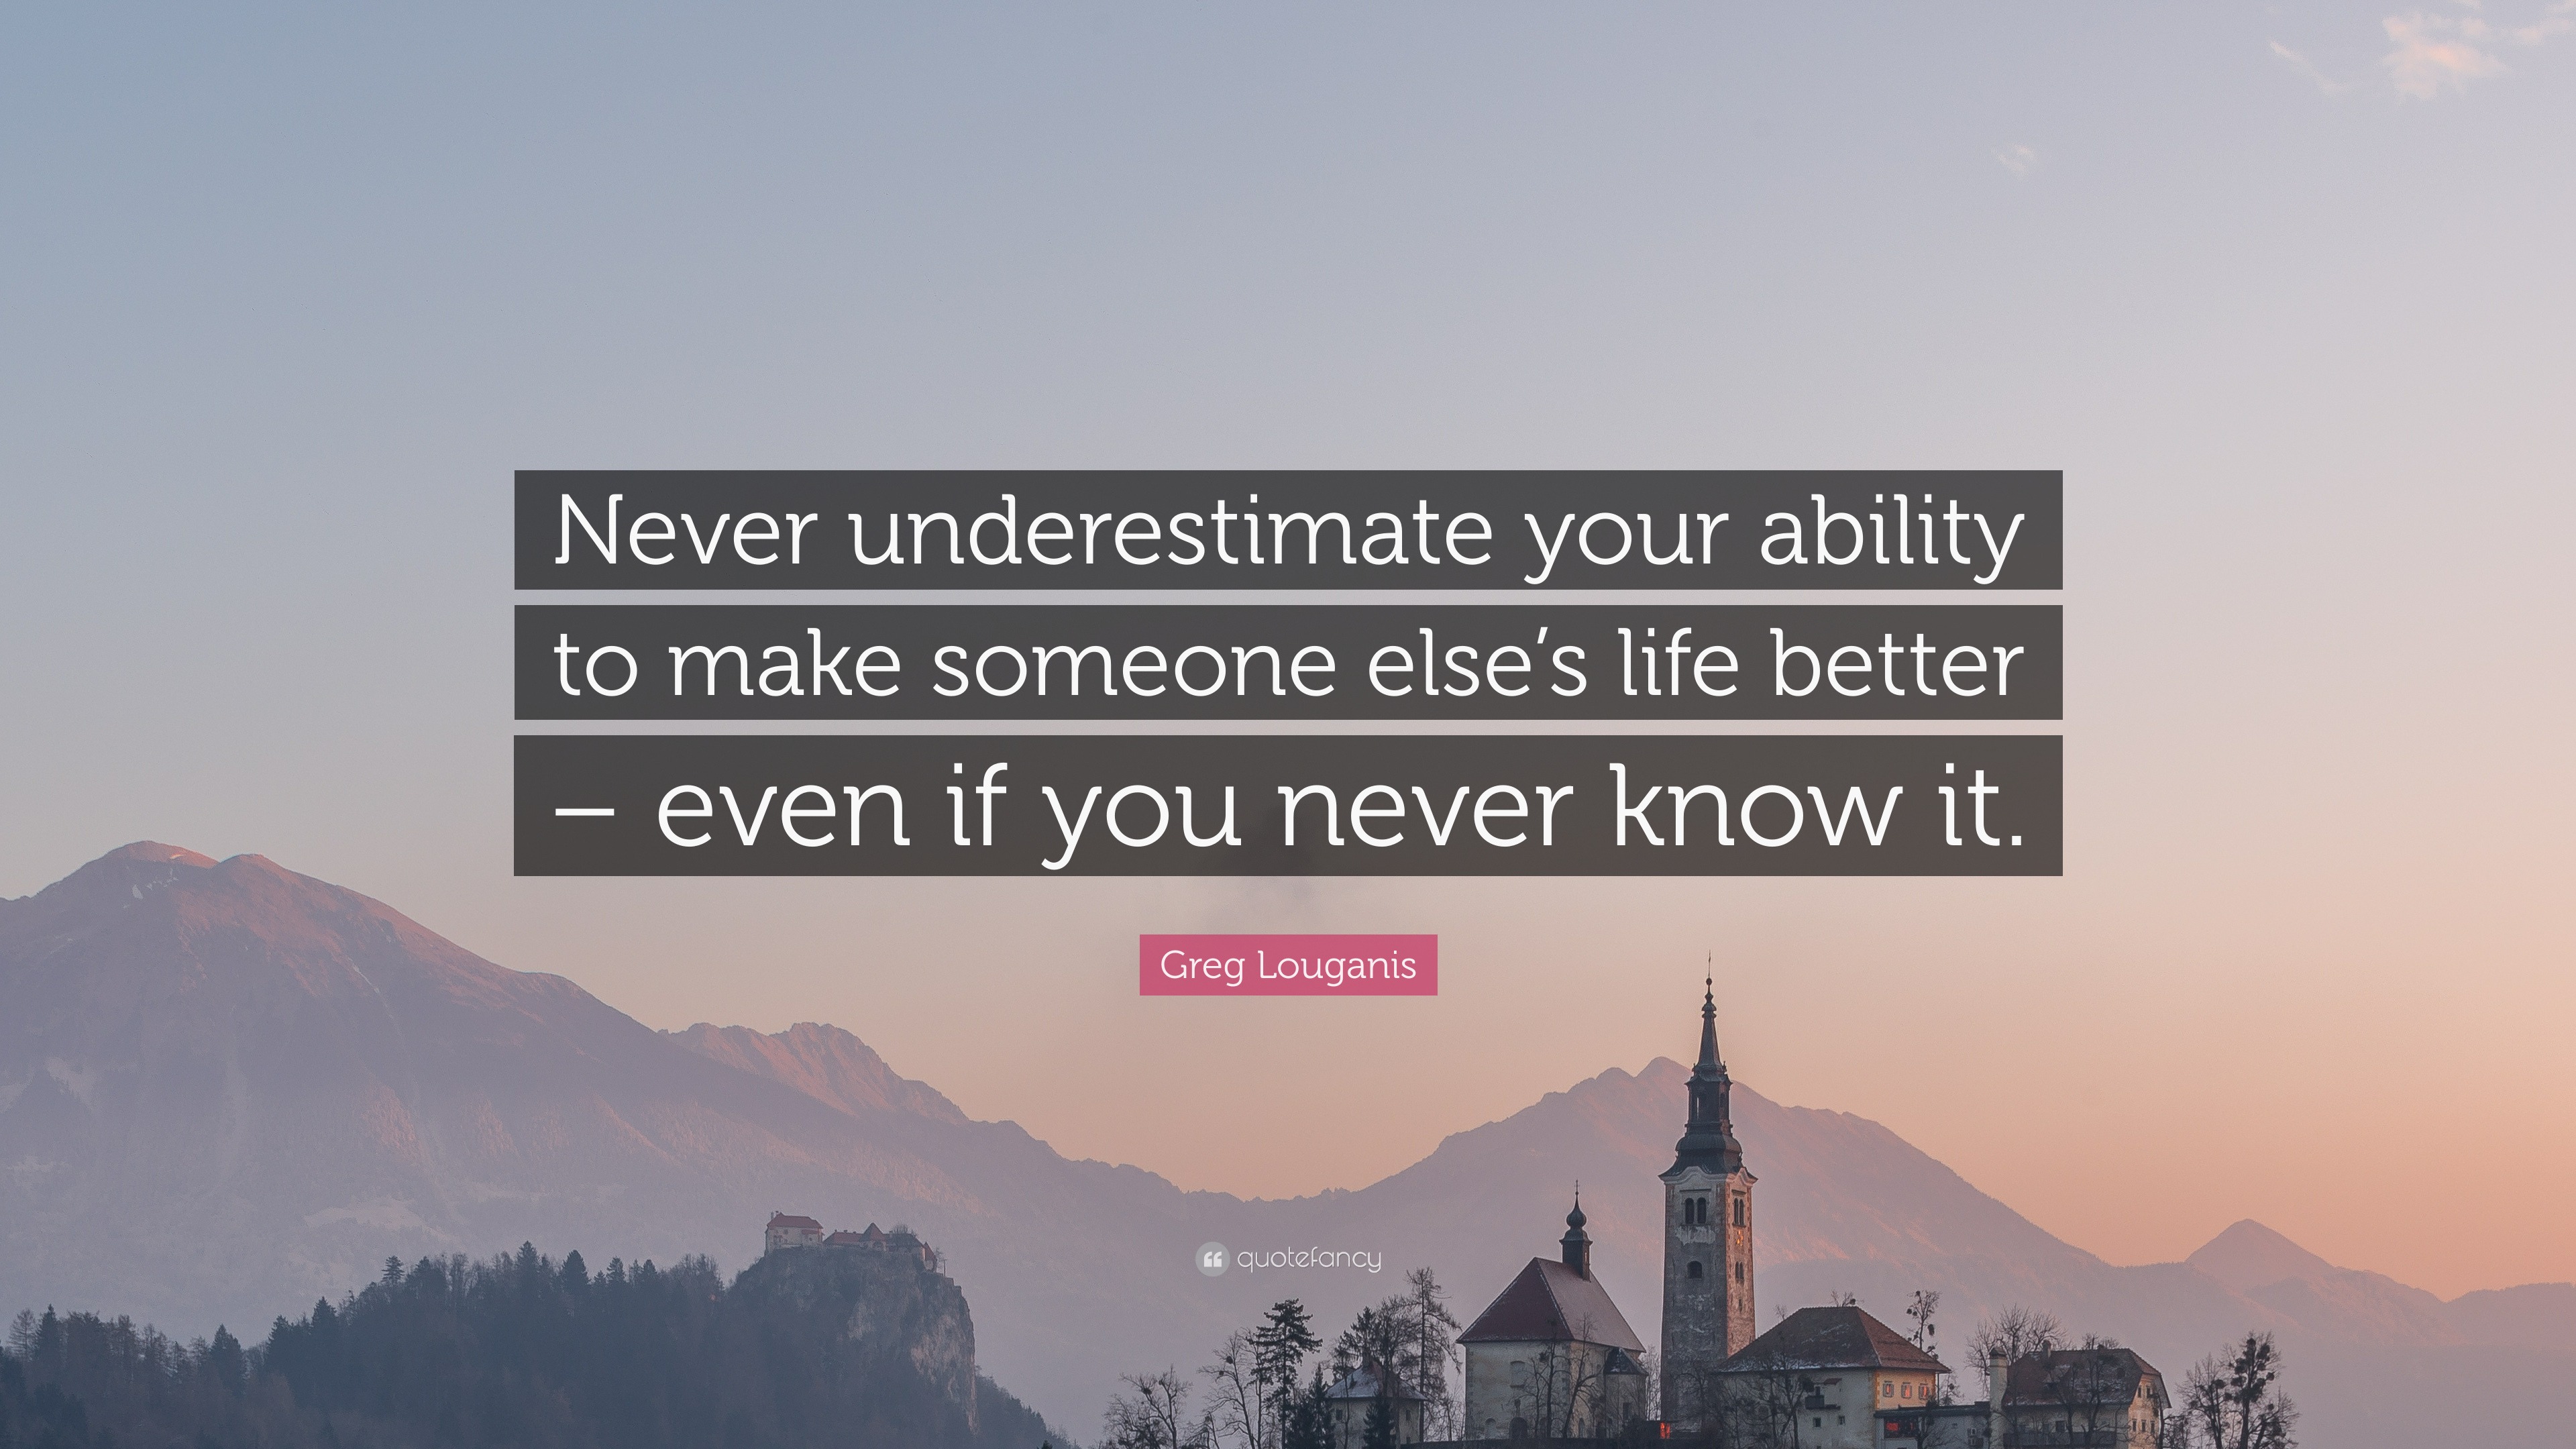 Greg Louganis Quote: “Never underestimate your ability to make someone ...